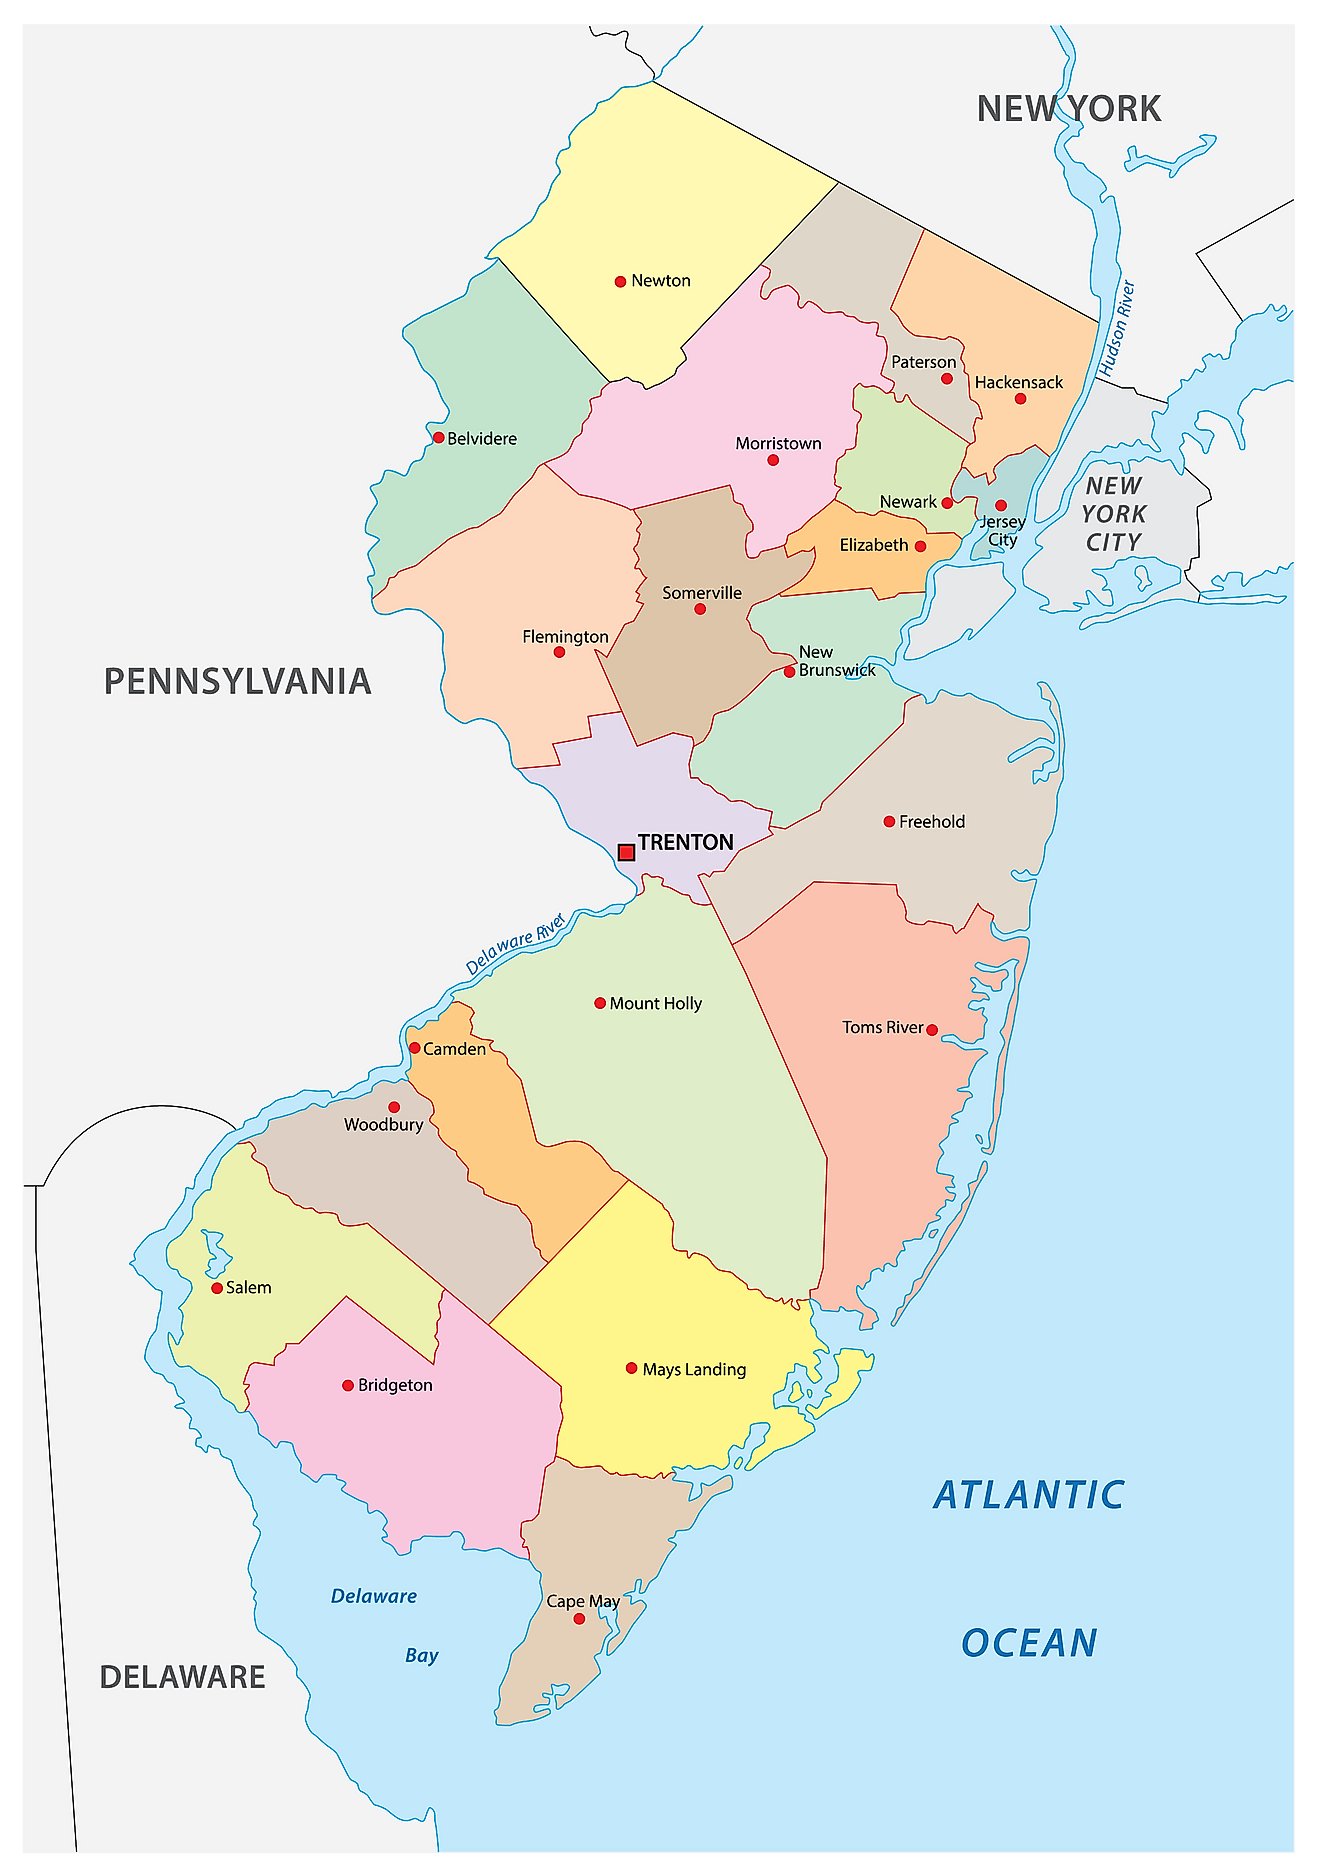 Administrative Map of New Jersey showing its 21 counties and the capital city - Trenton